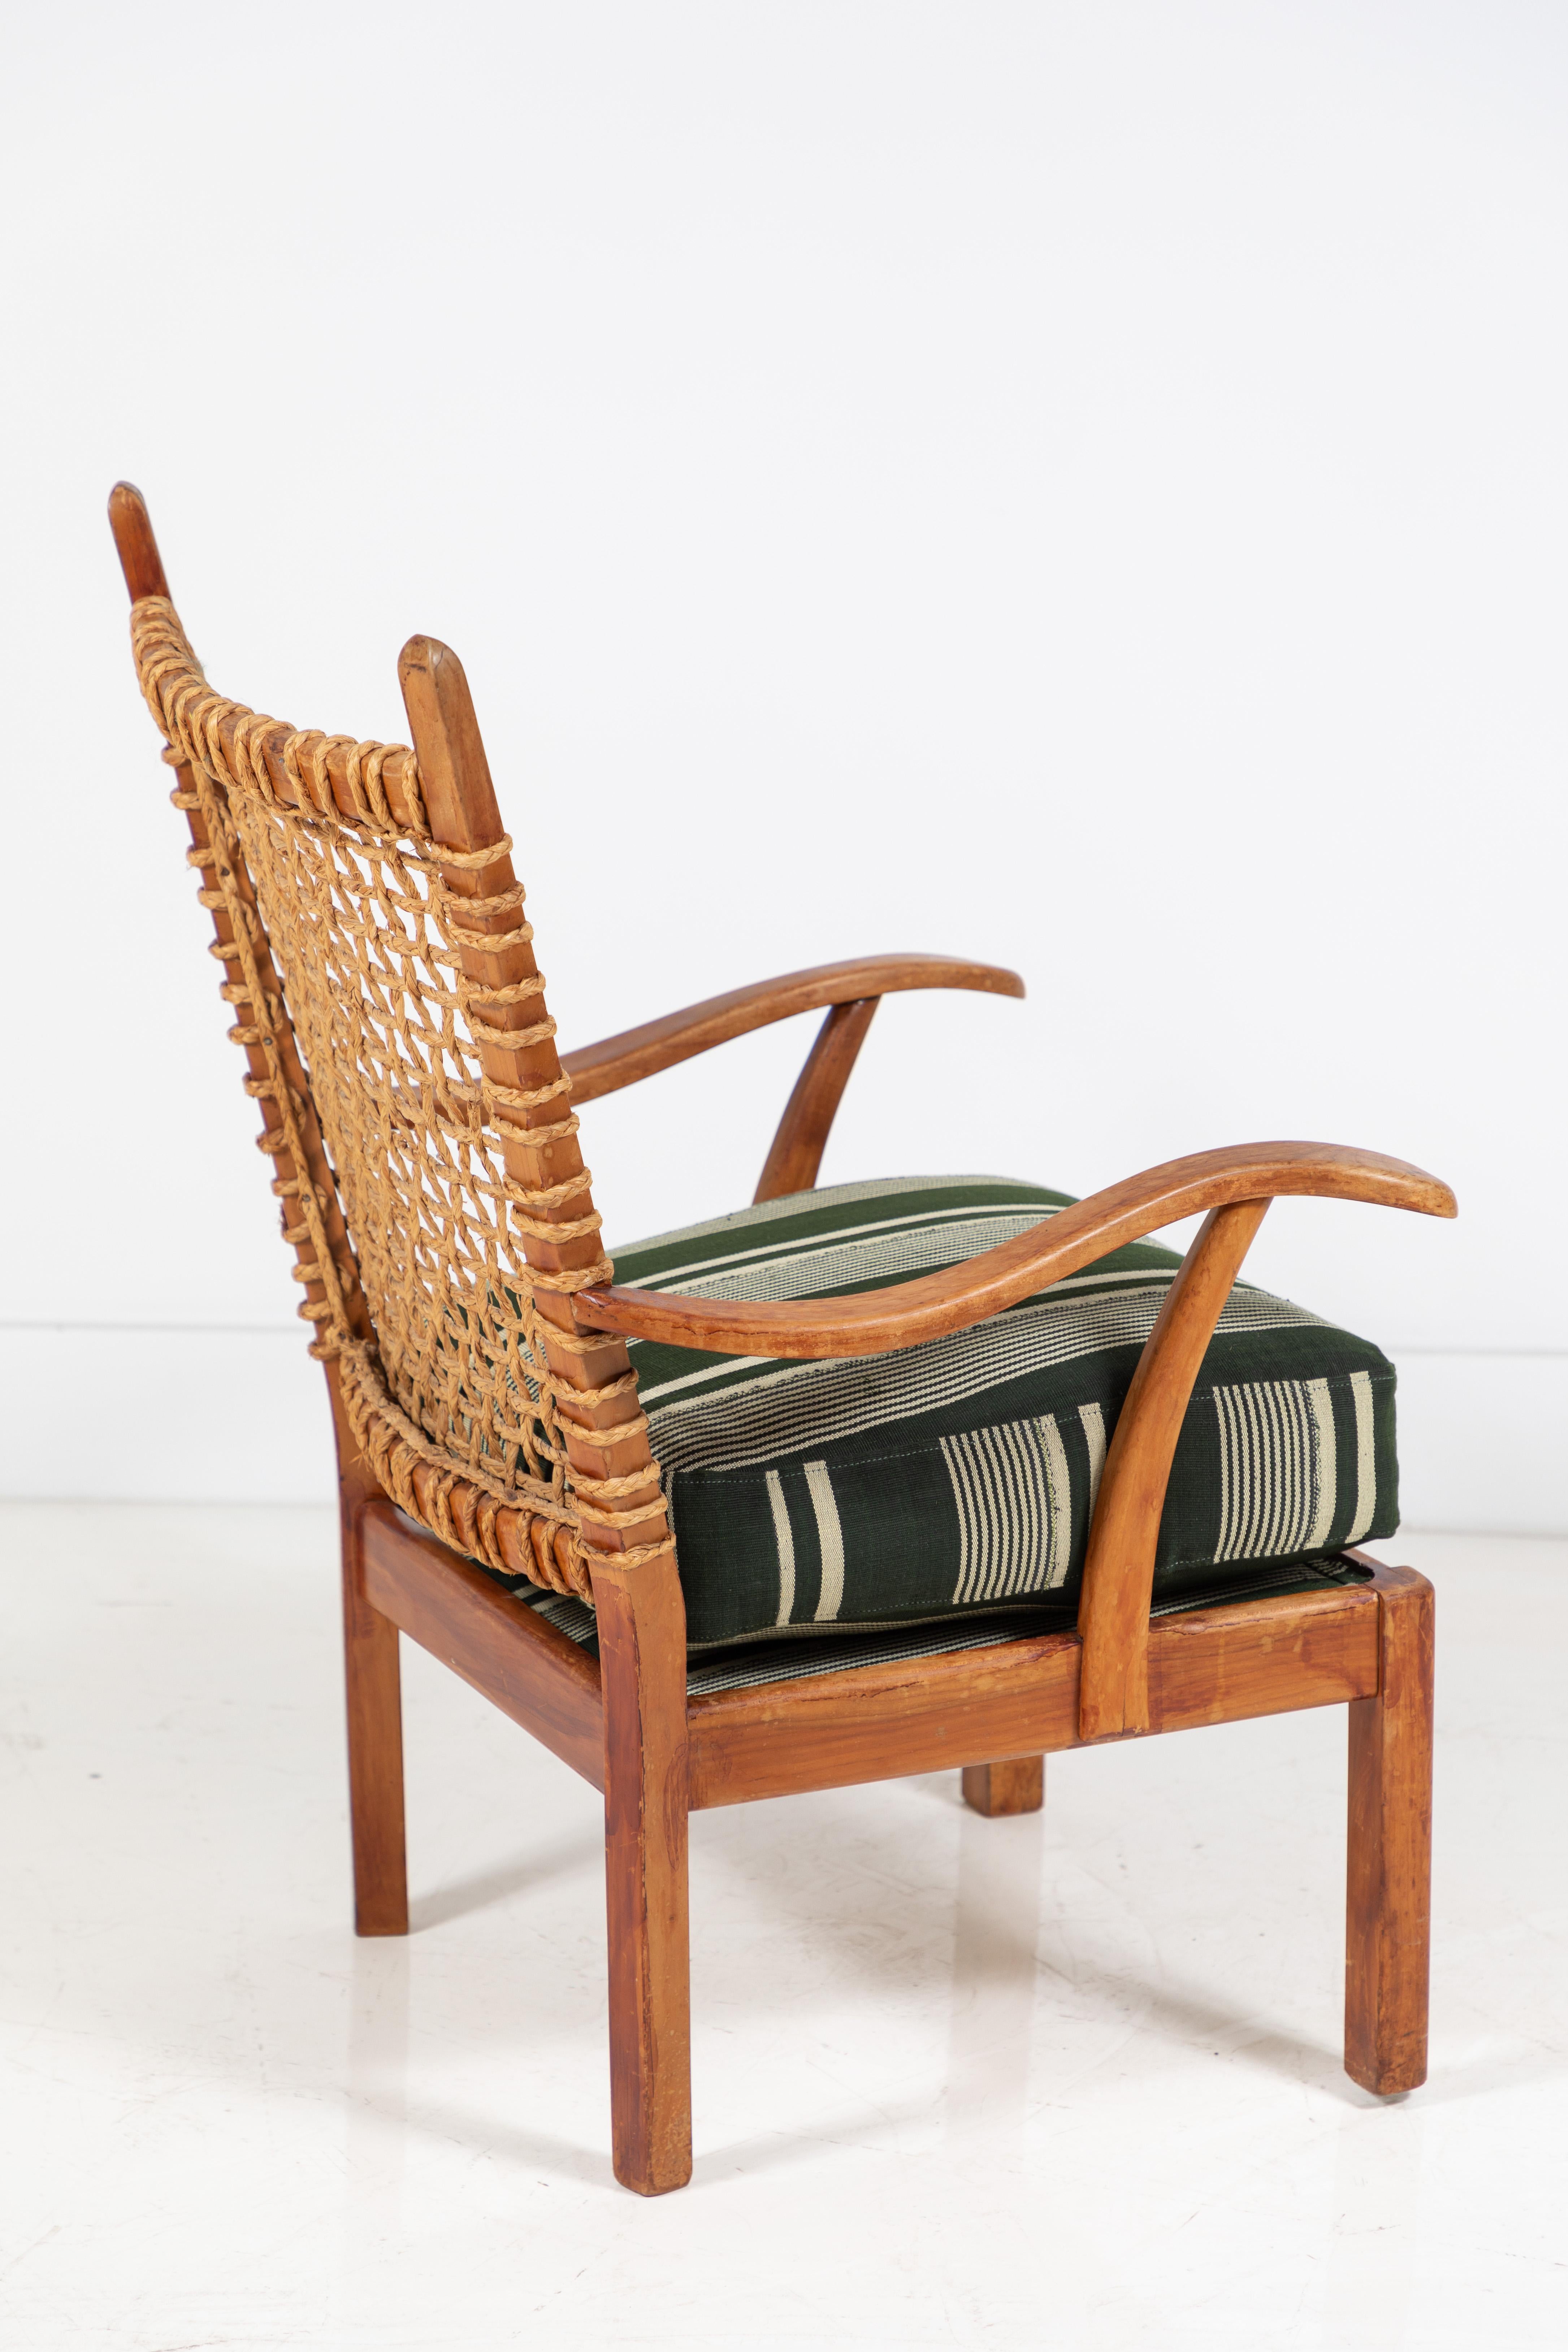 Mid-20th Century Vintage Rope Chair with Green Cushion